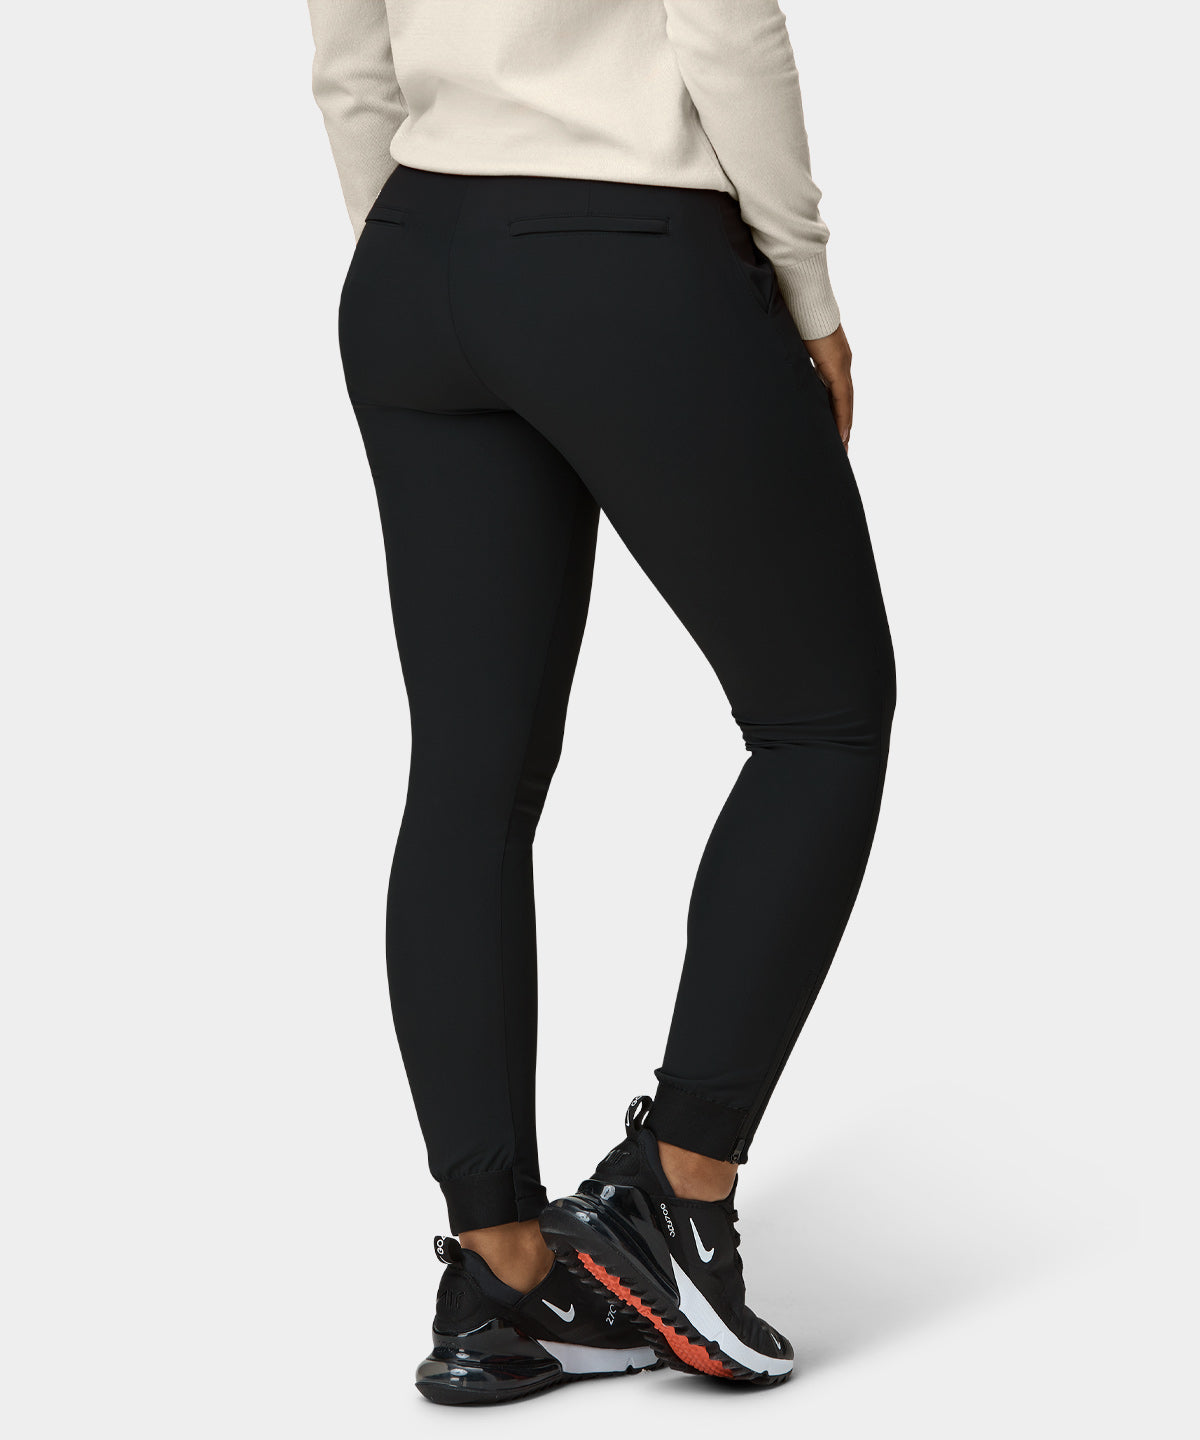 Maceoo 4-way Stretch Pants Squared Black